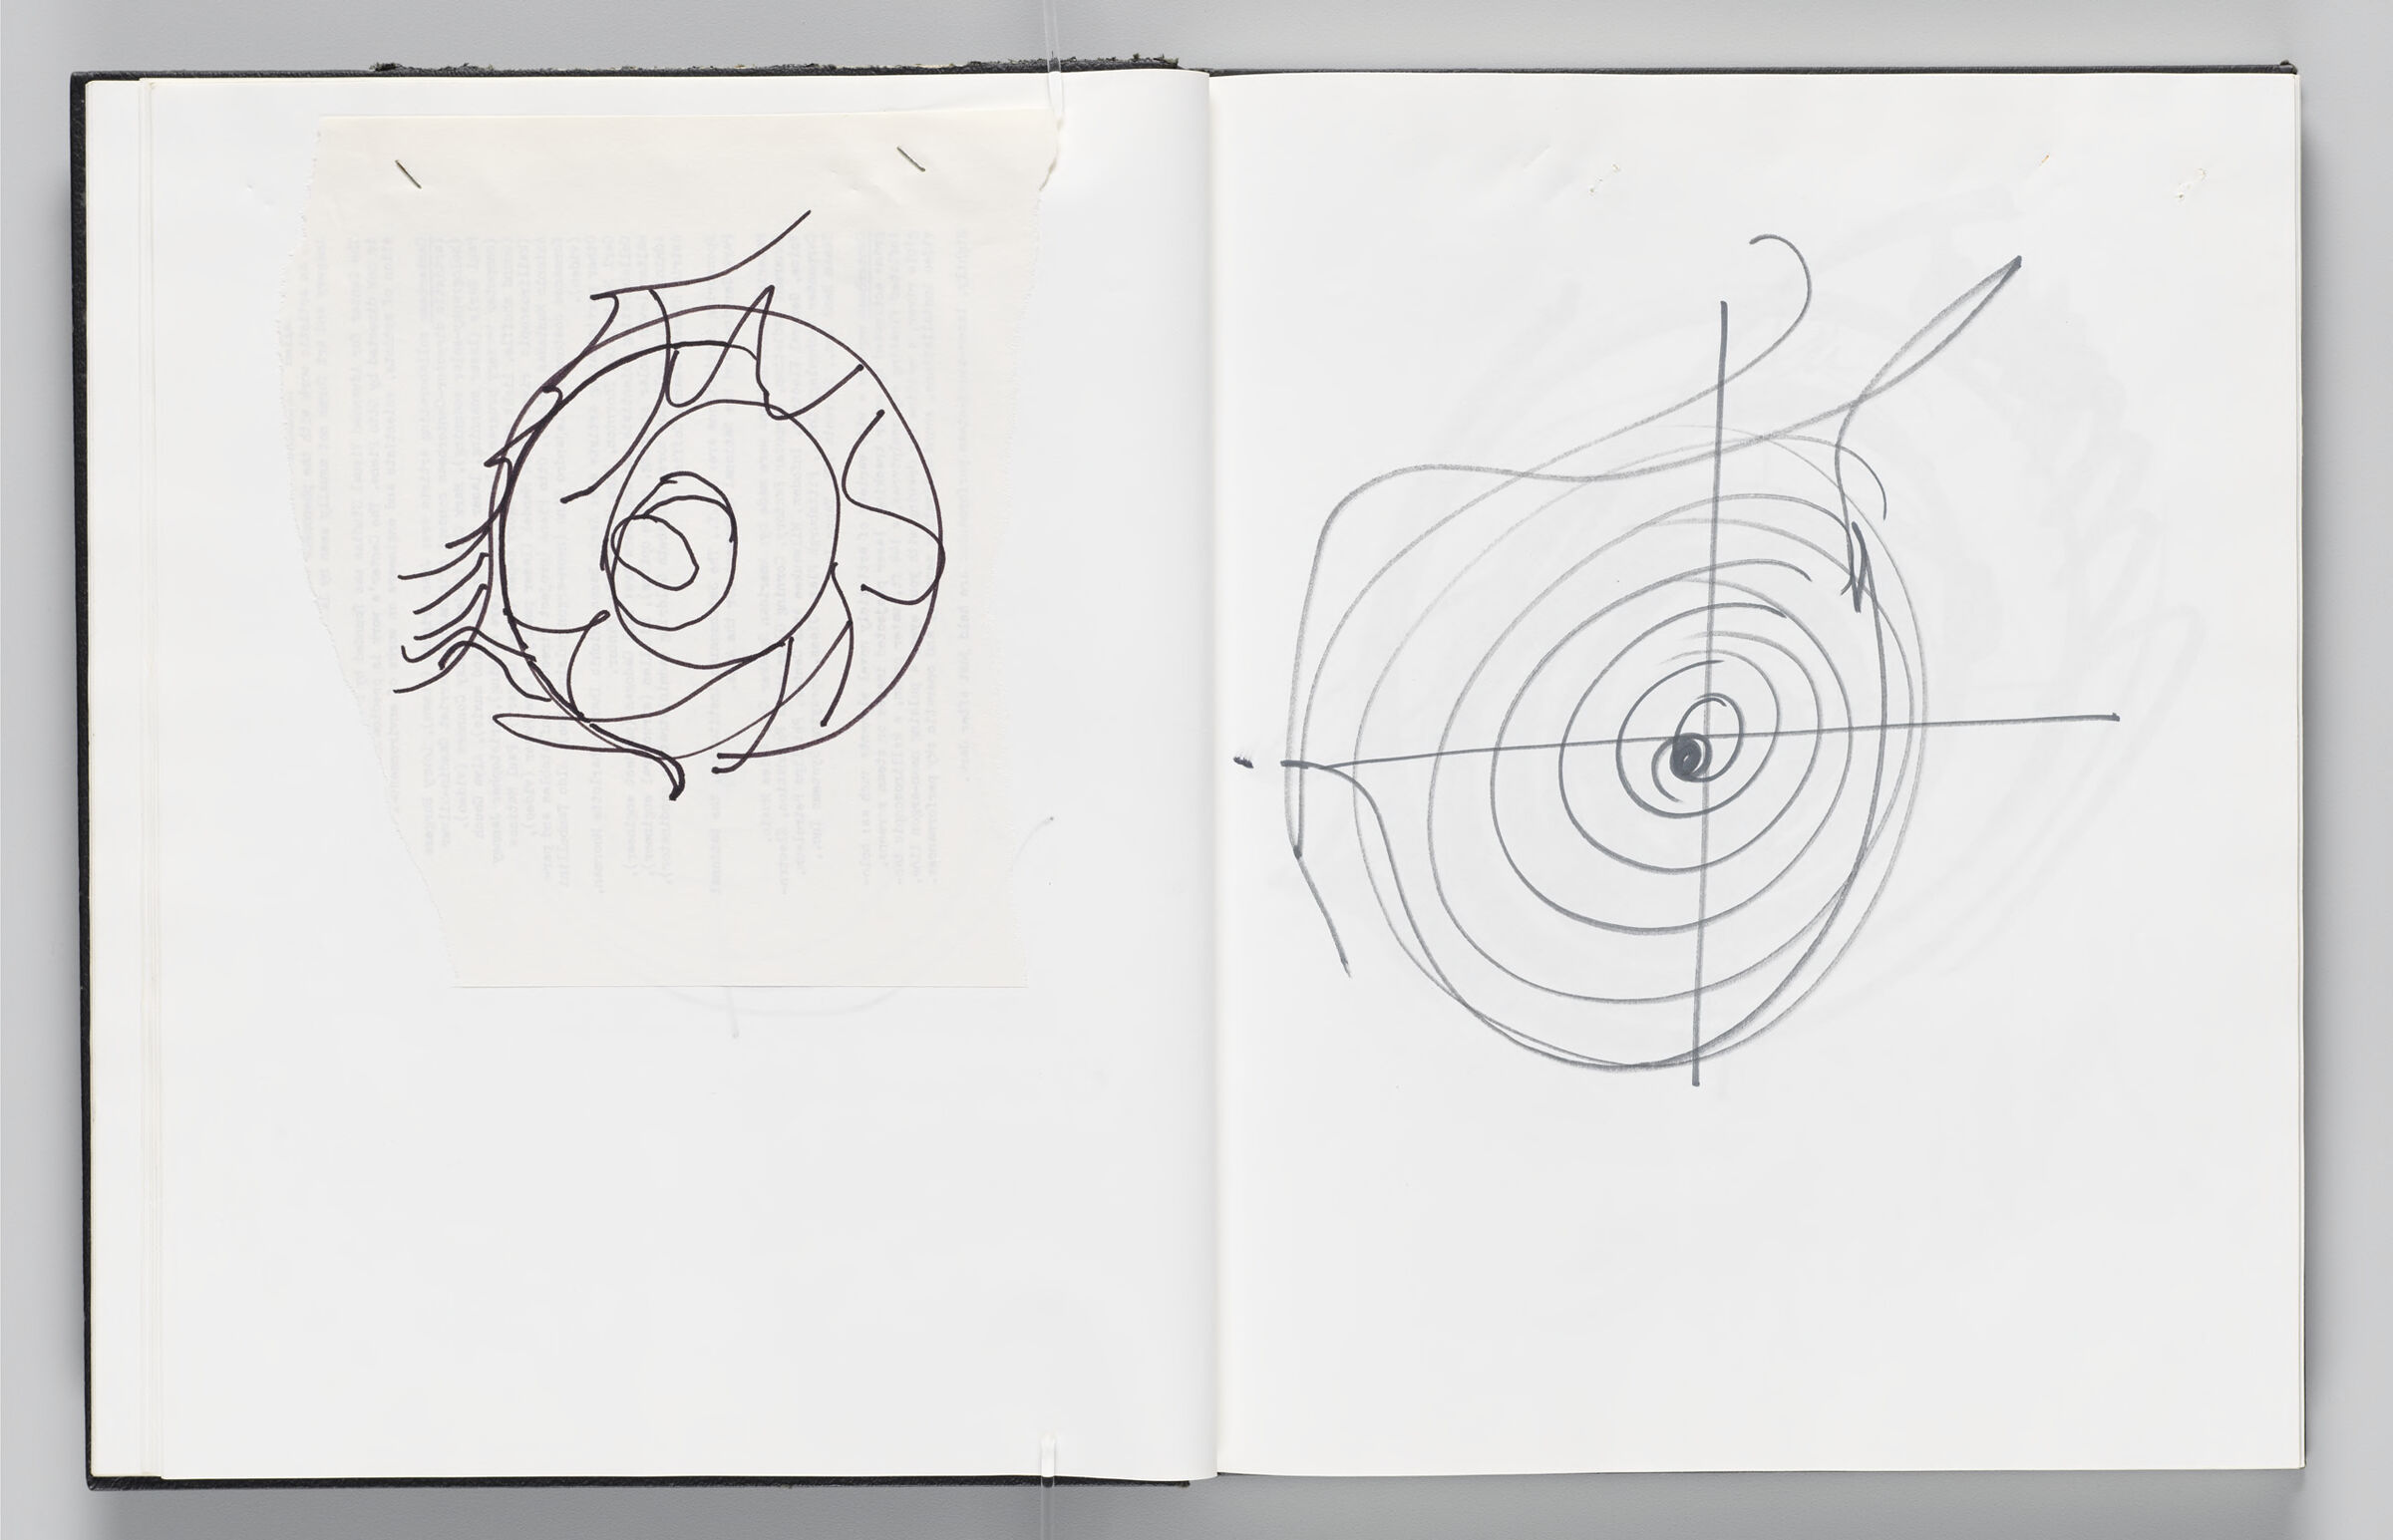 Untitled (Bleed-Through Of Previous Page With Stapled Sketch Of Eye, Left Page); Untitled (